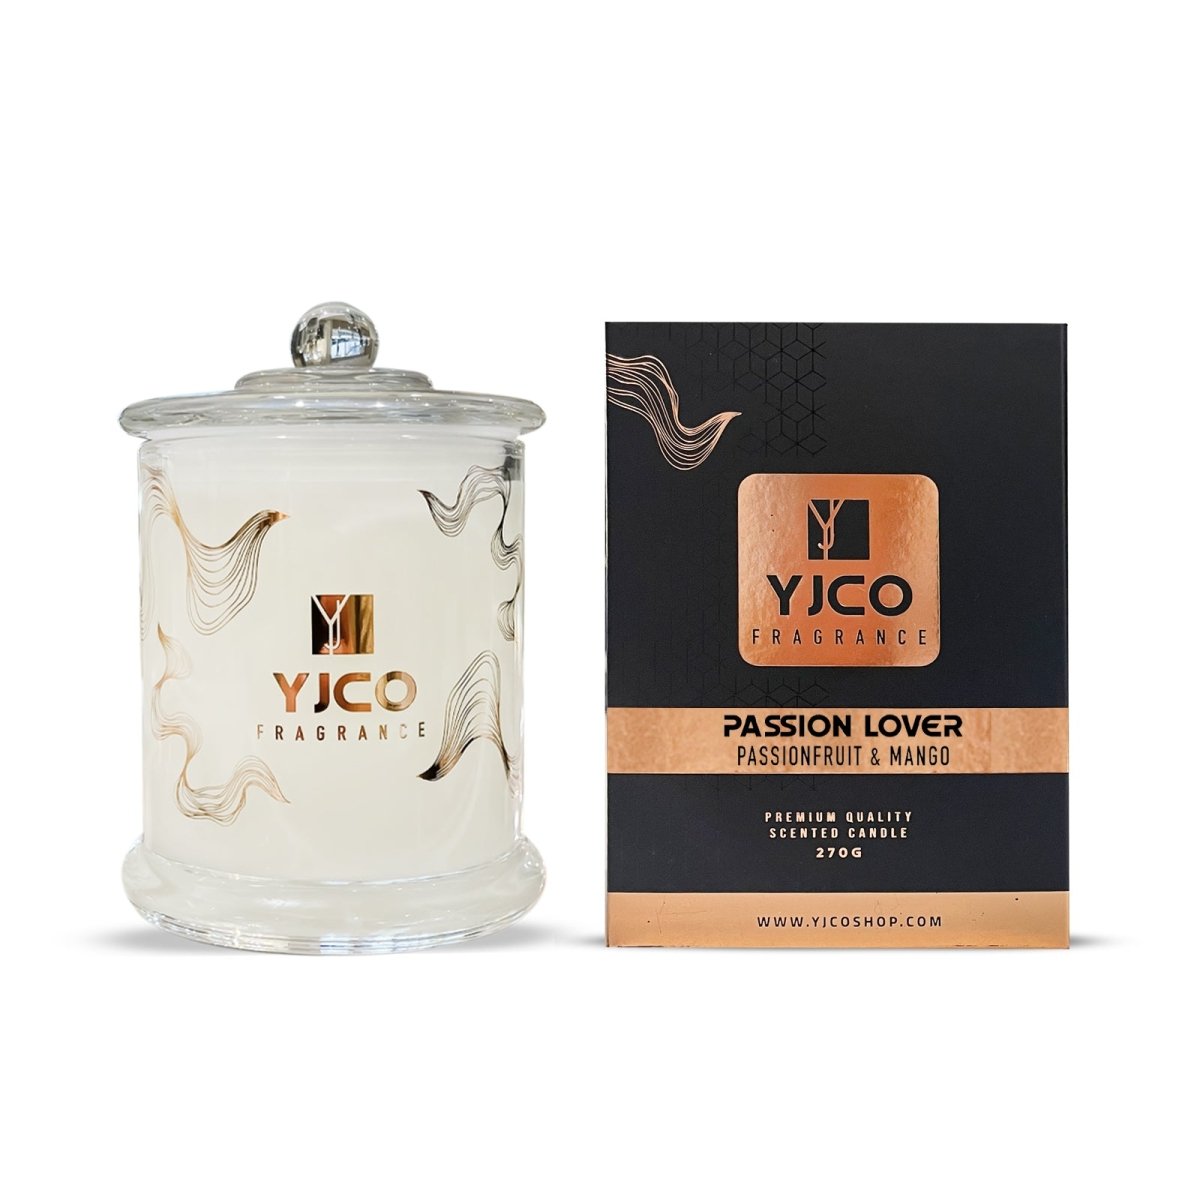 Passion Lover Premium Scented 2 wick Candle 270G - YJCO FRAGRANCE